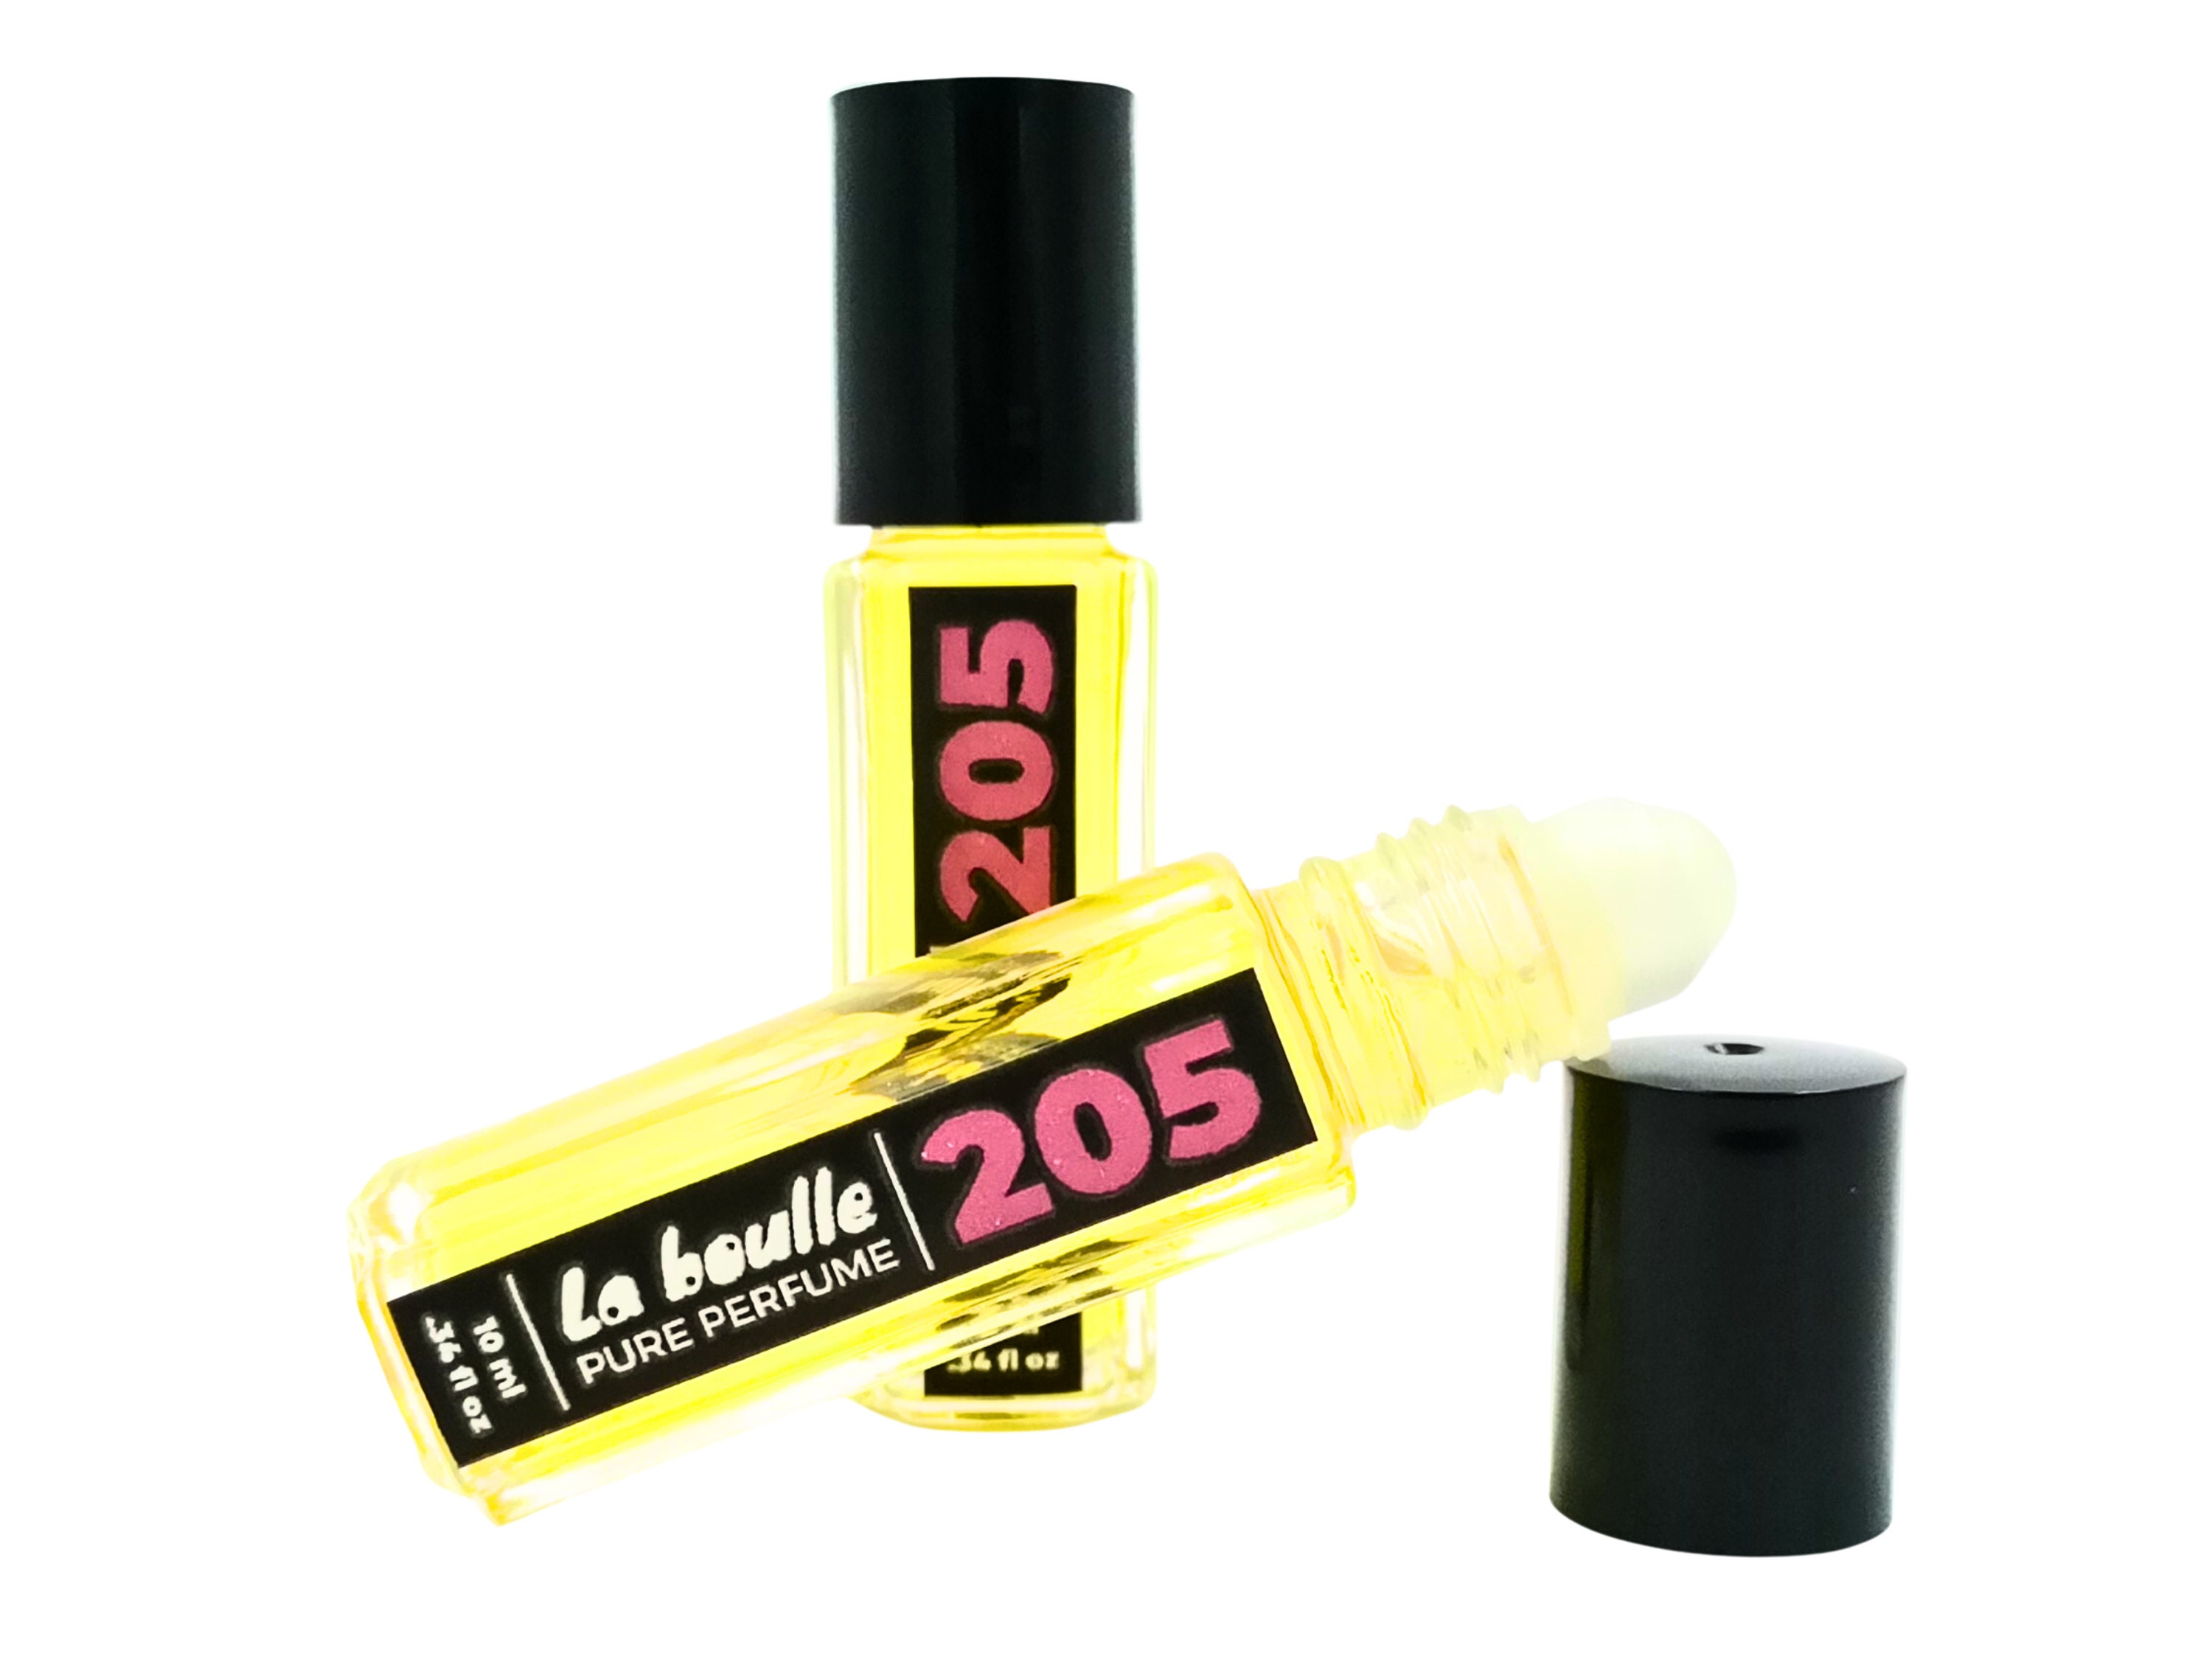 Perfume No. 205 by La Boulle. Si for Her. Inspired Pure 